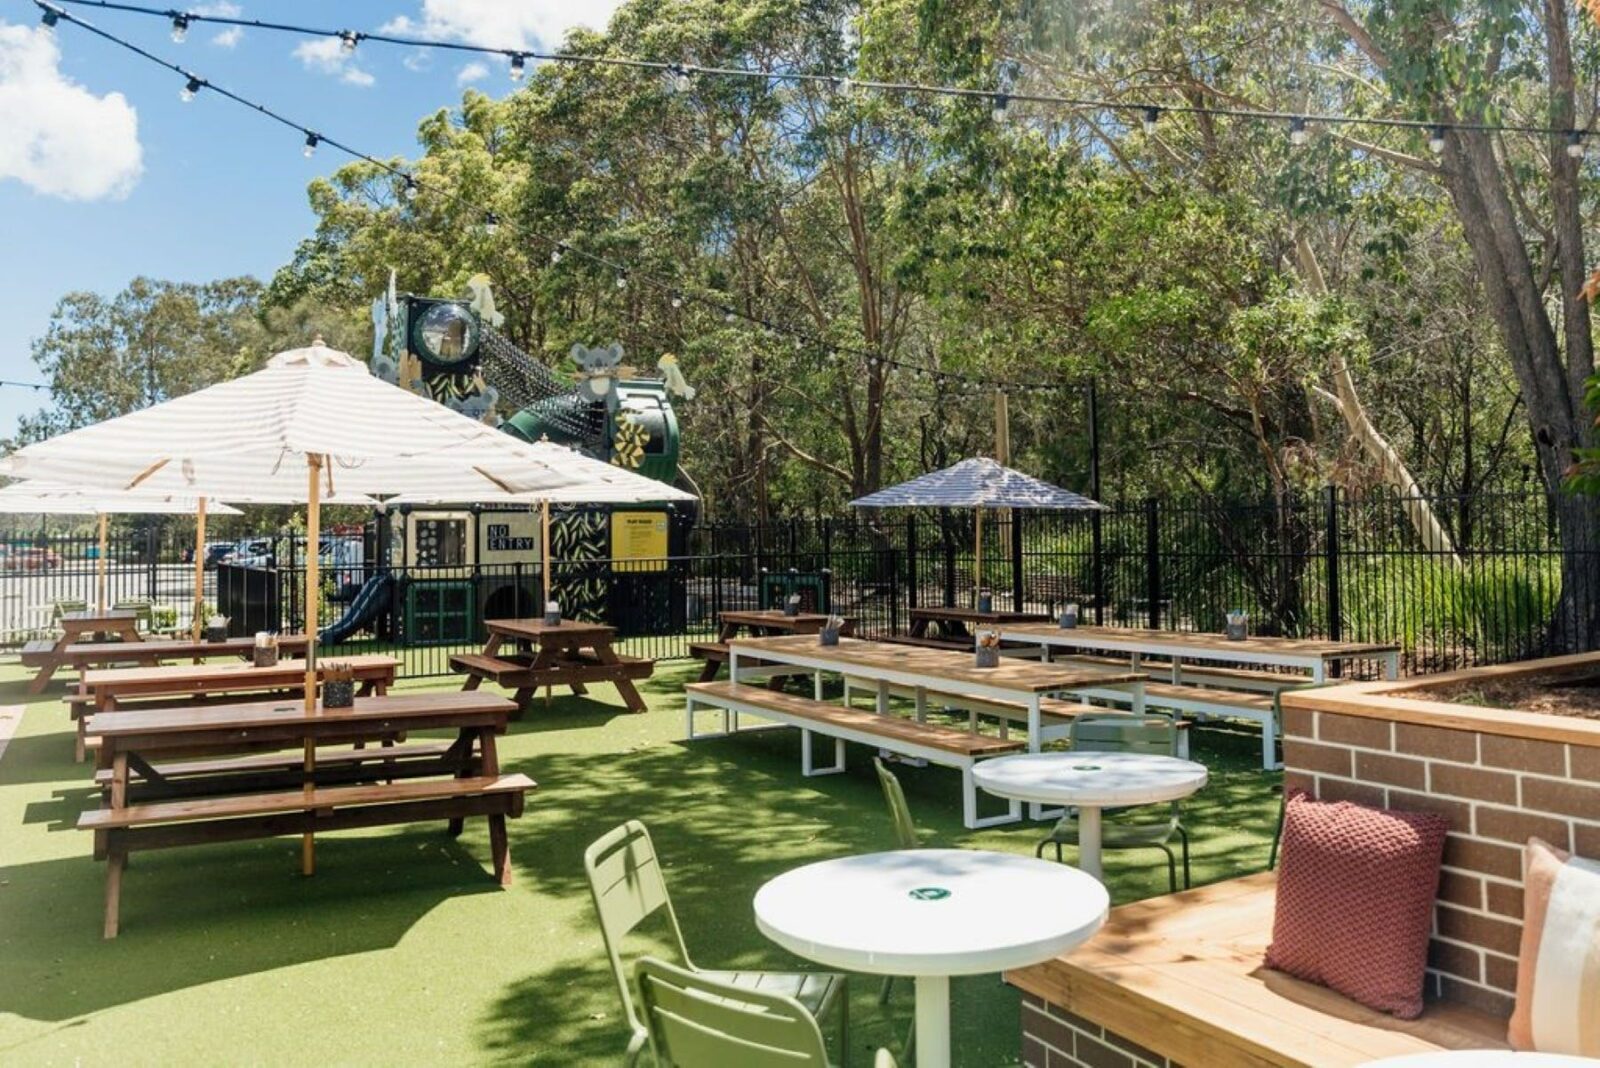 New beer garden complete with children's playground set amongst the local bush reserve